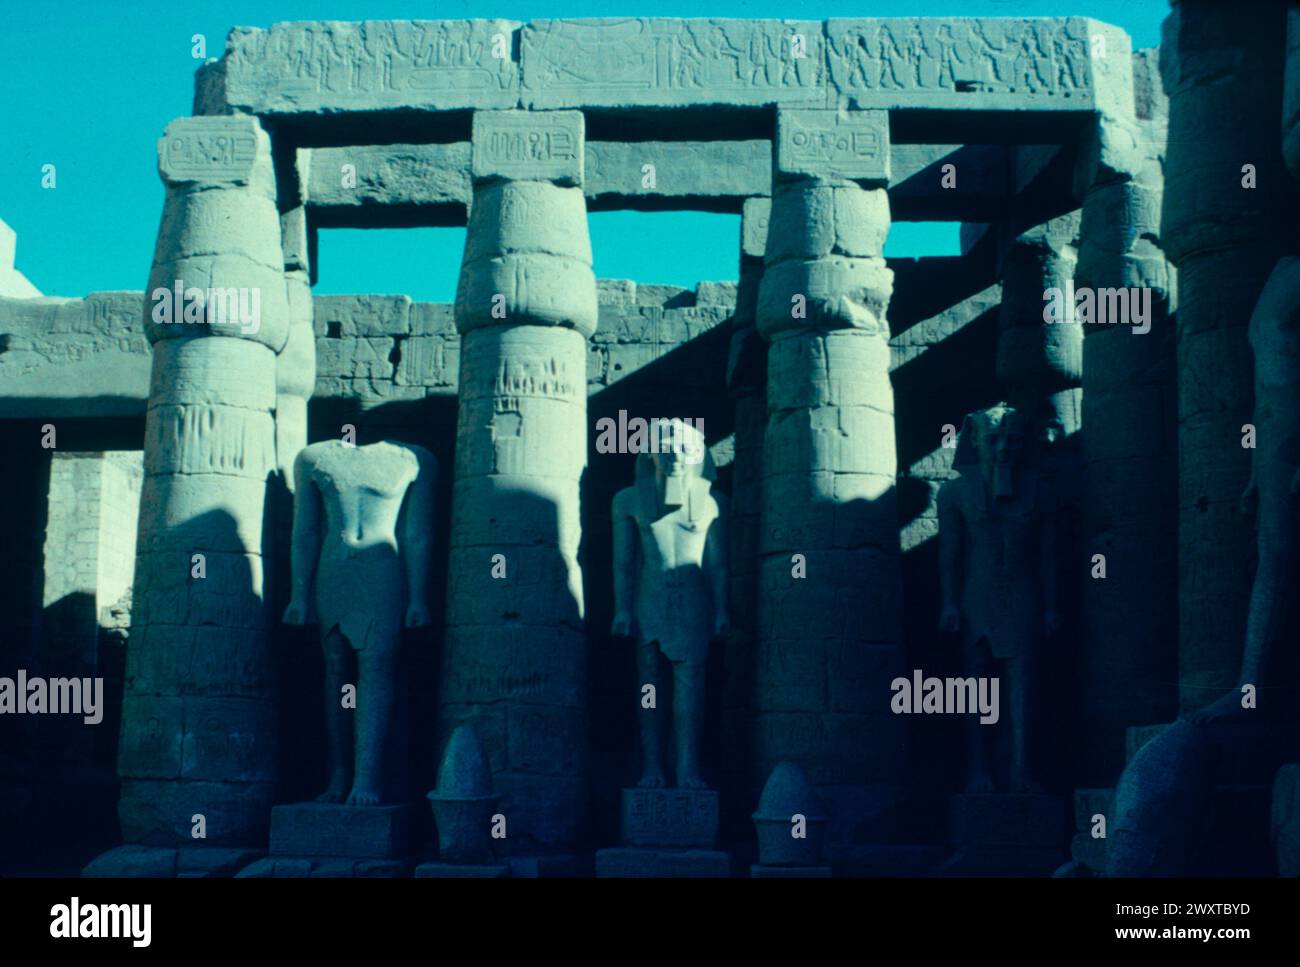 The temple of the god Amon, Luxor, Egypt 1300 BC Stock Photo